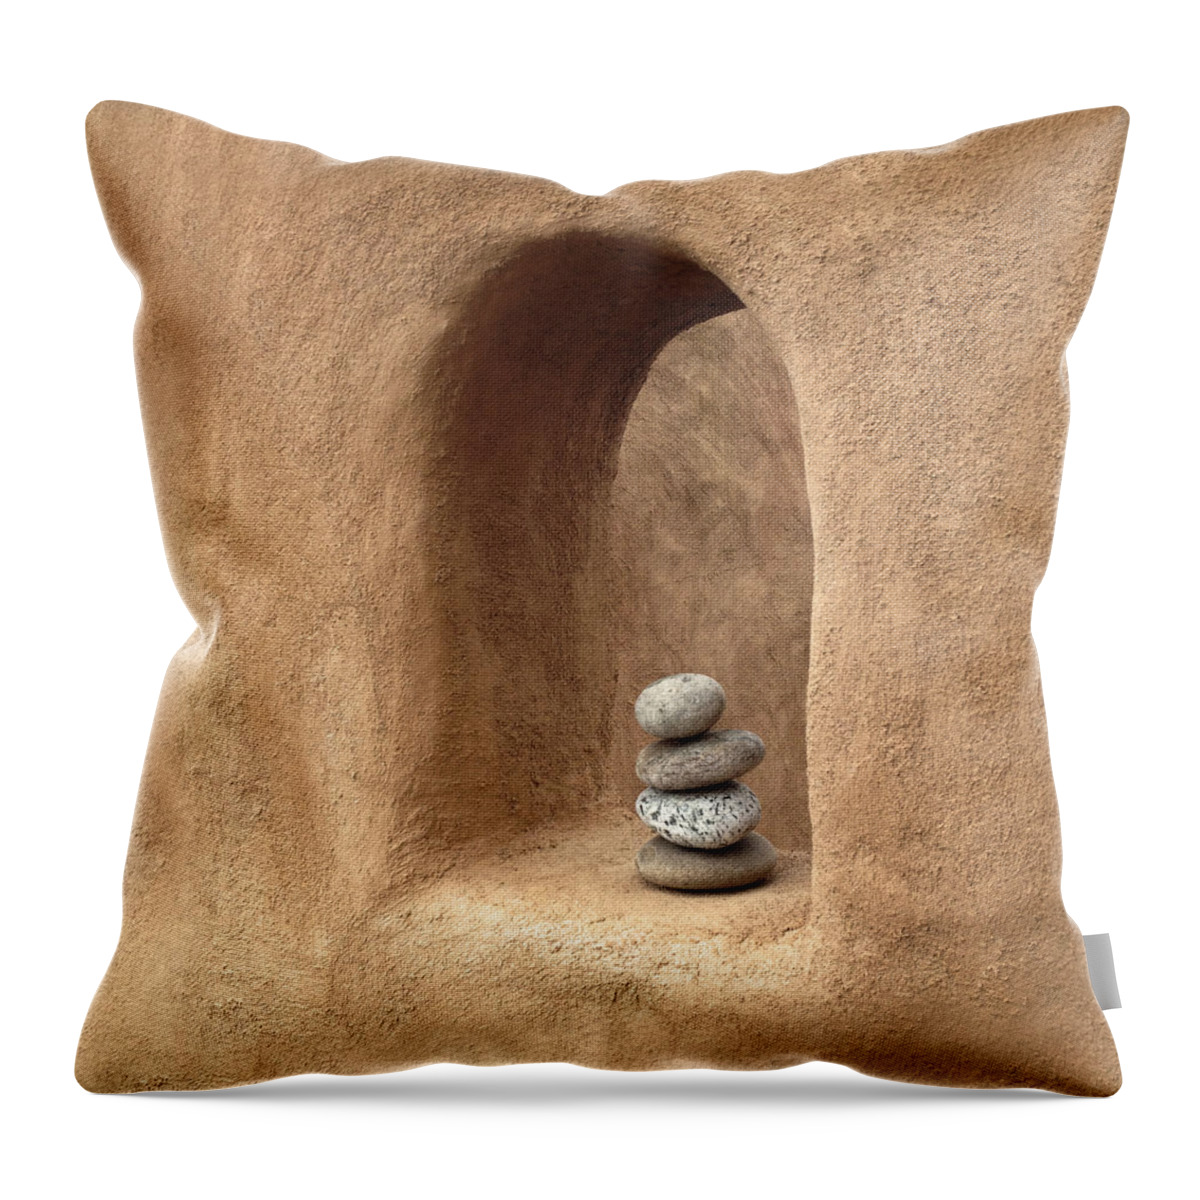 Balance Throw Pillow featuring the photograph Balance by Don Spenner